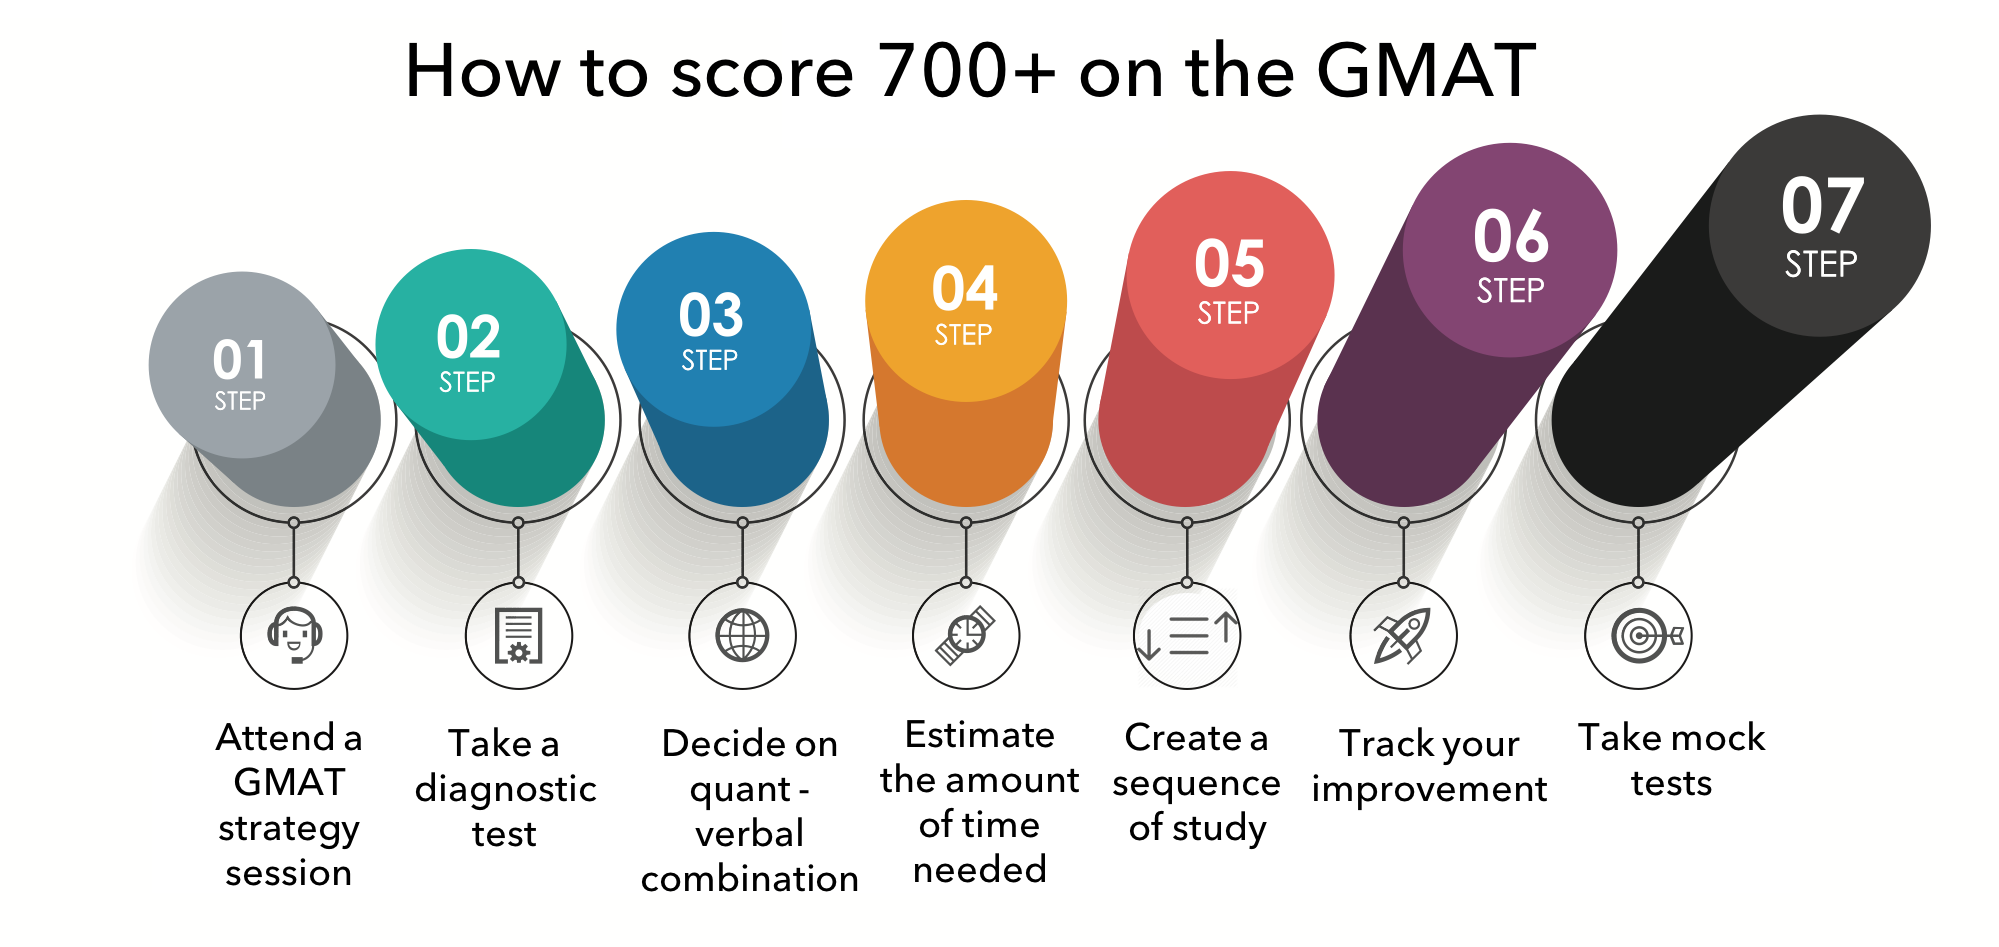 7 Steps – How to score 700+ on the GMAT